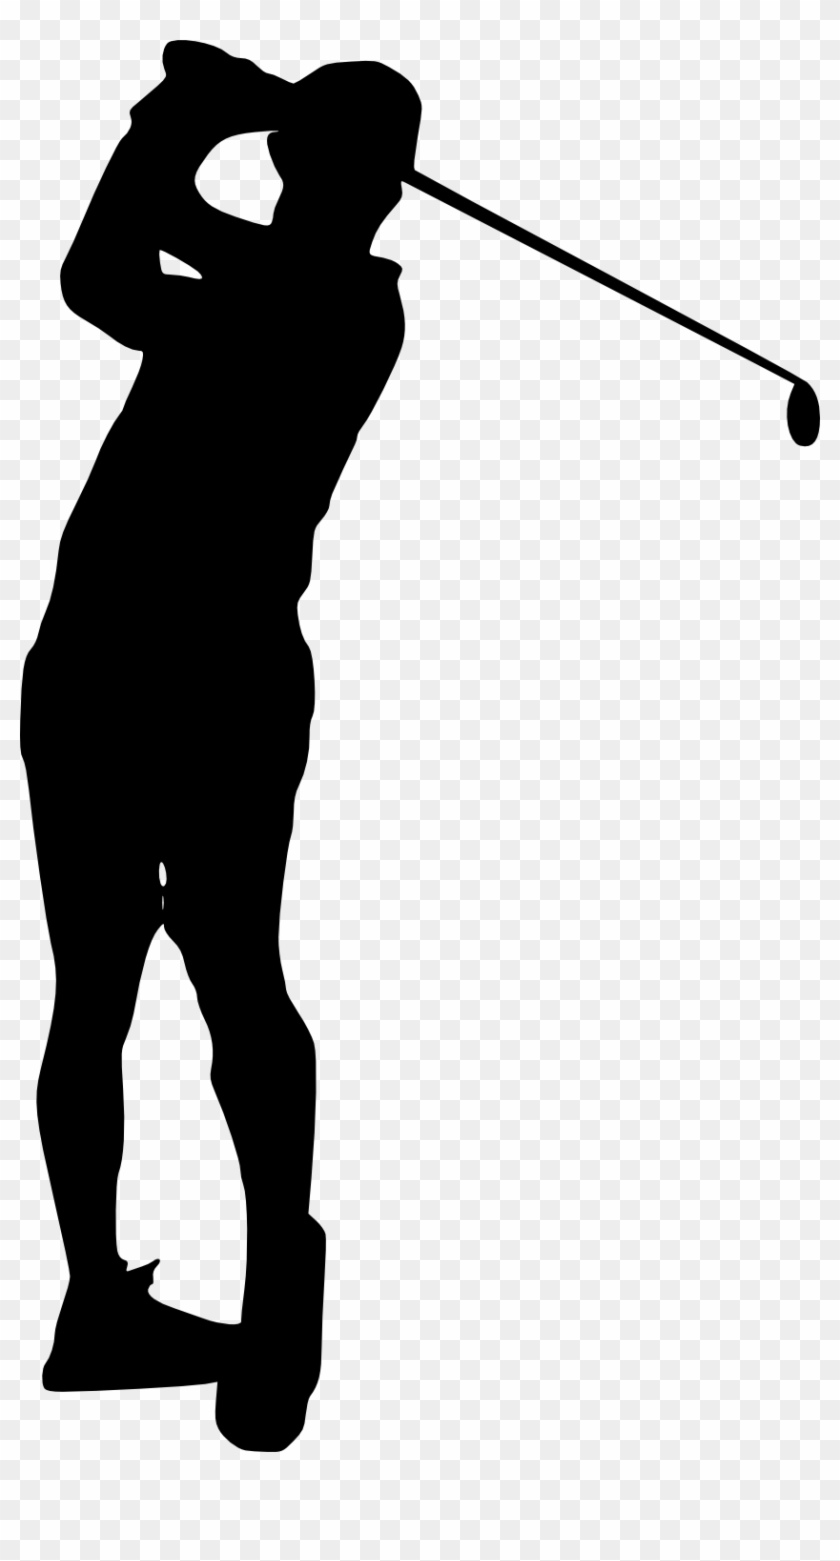 Free Download - Golfer Silhouette Png #407797